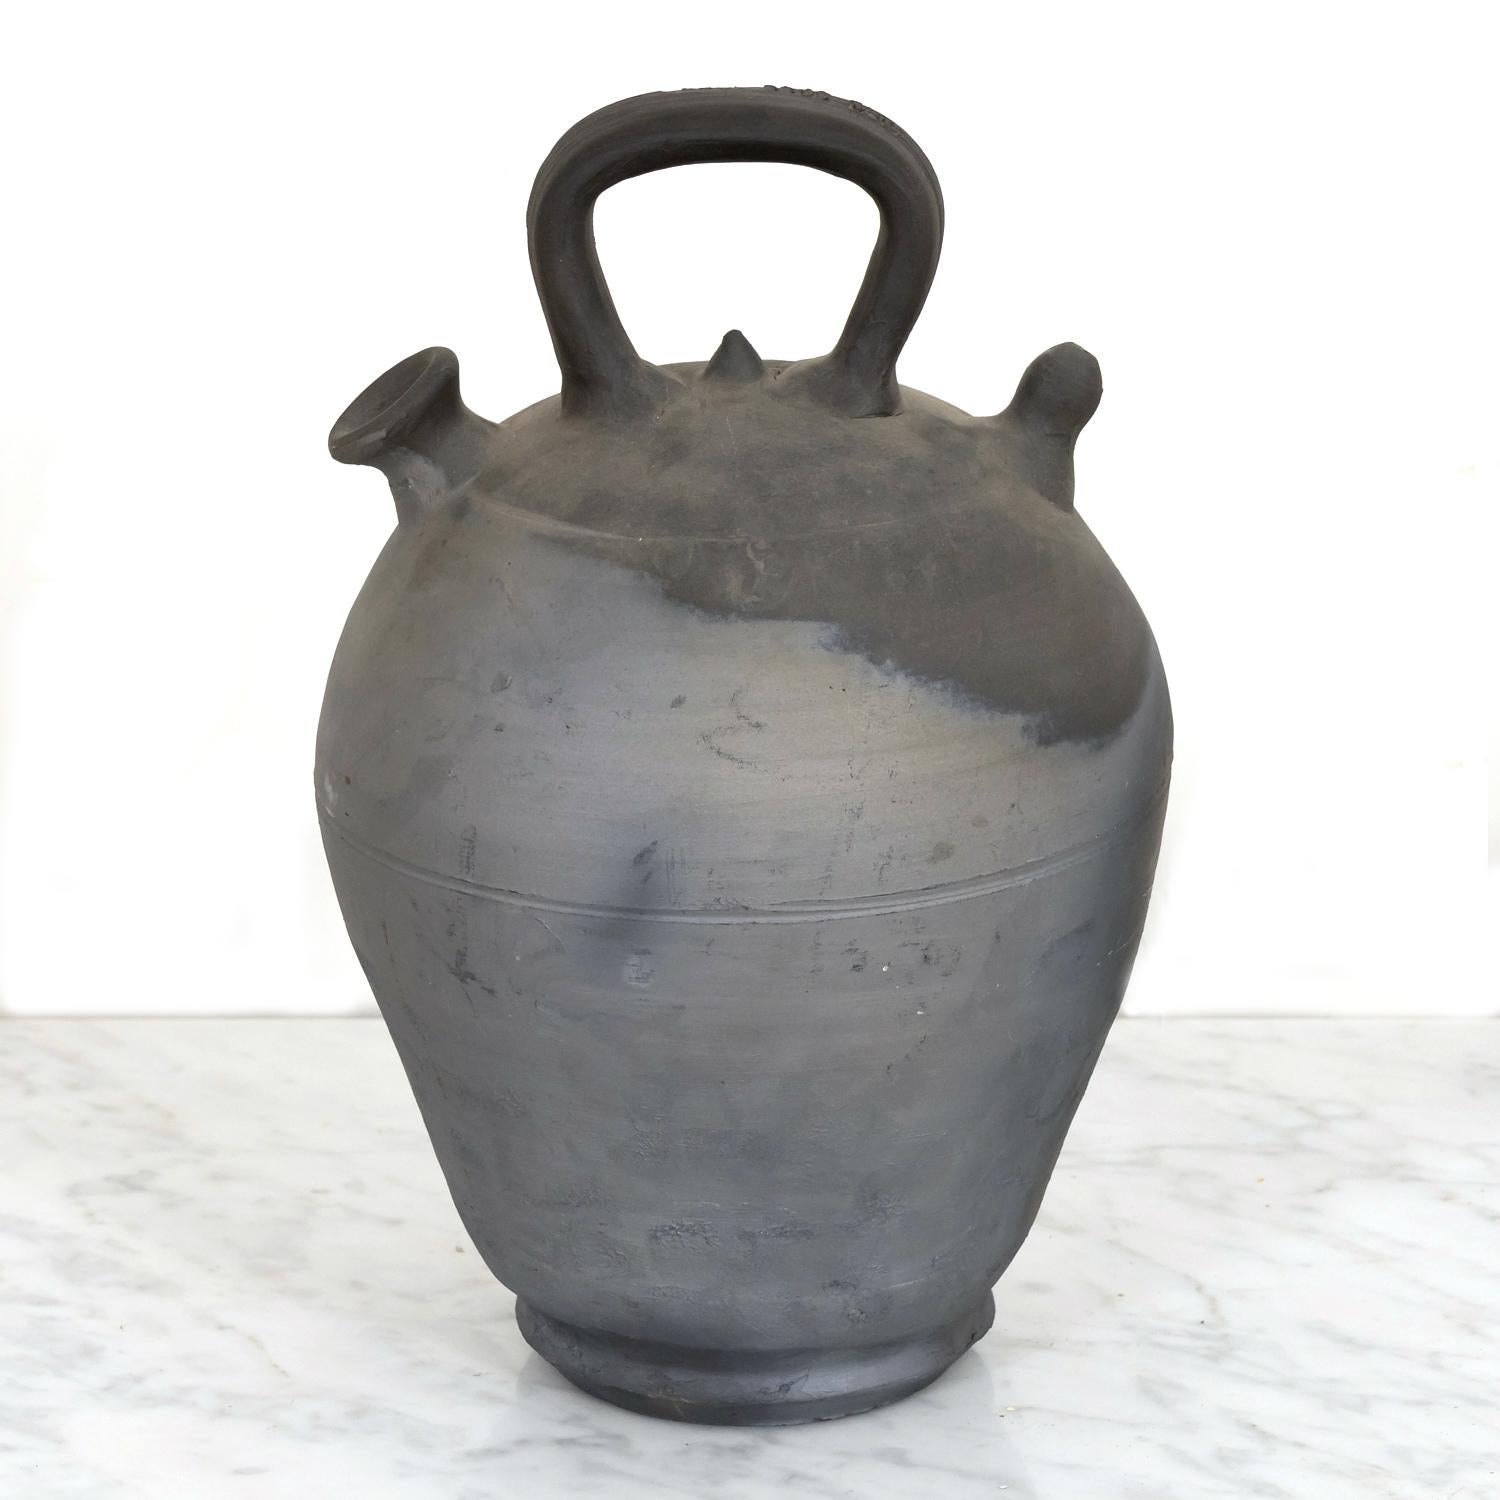 An early 20th century barro negro or black clay botijo, hand made and signed ROCA CAUS VERDU on the handle, by the famed pottery company, Roca Caus, in the village of Verdú in the Catalan region of Spain, circa 1900. This beautiful utilitarian pot,